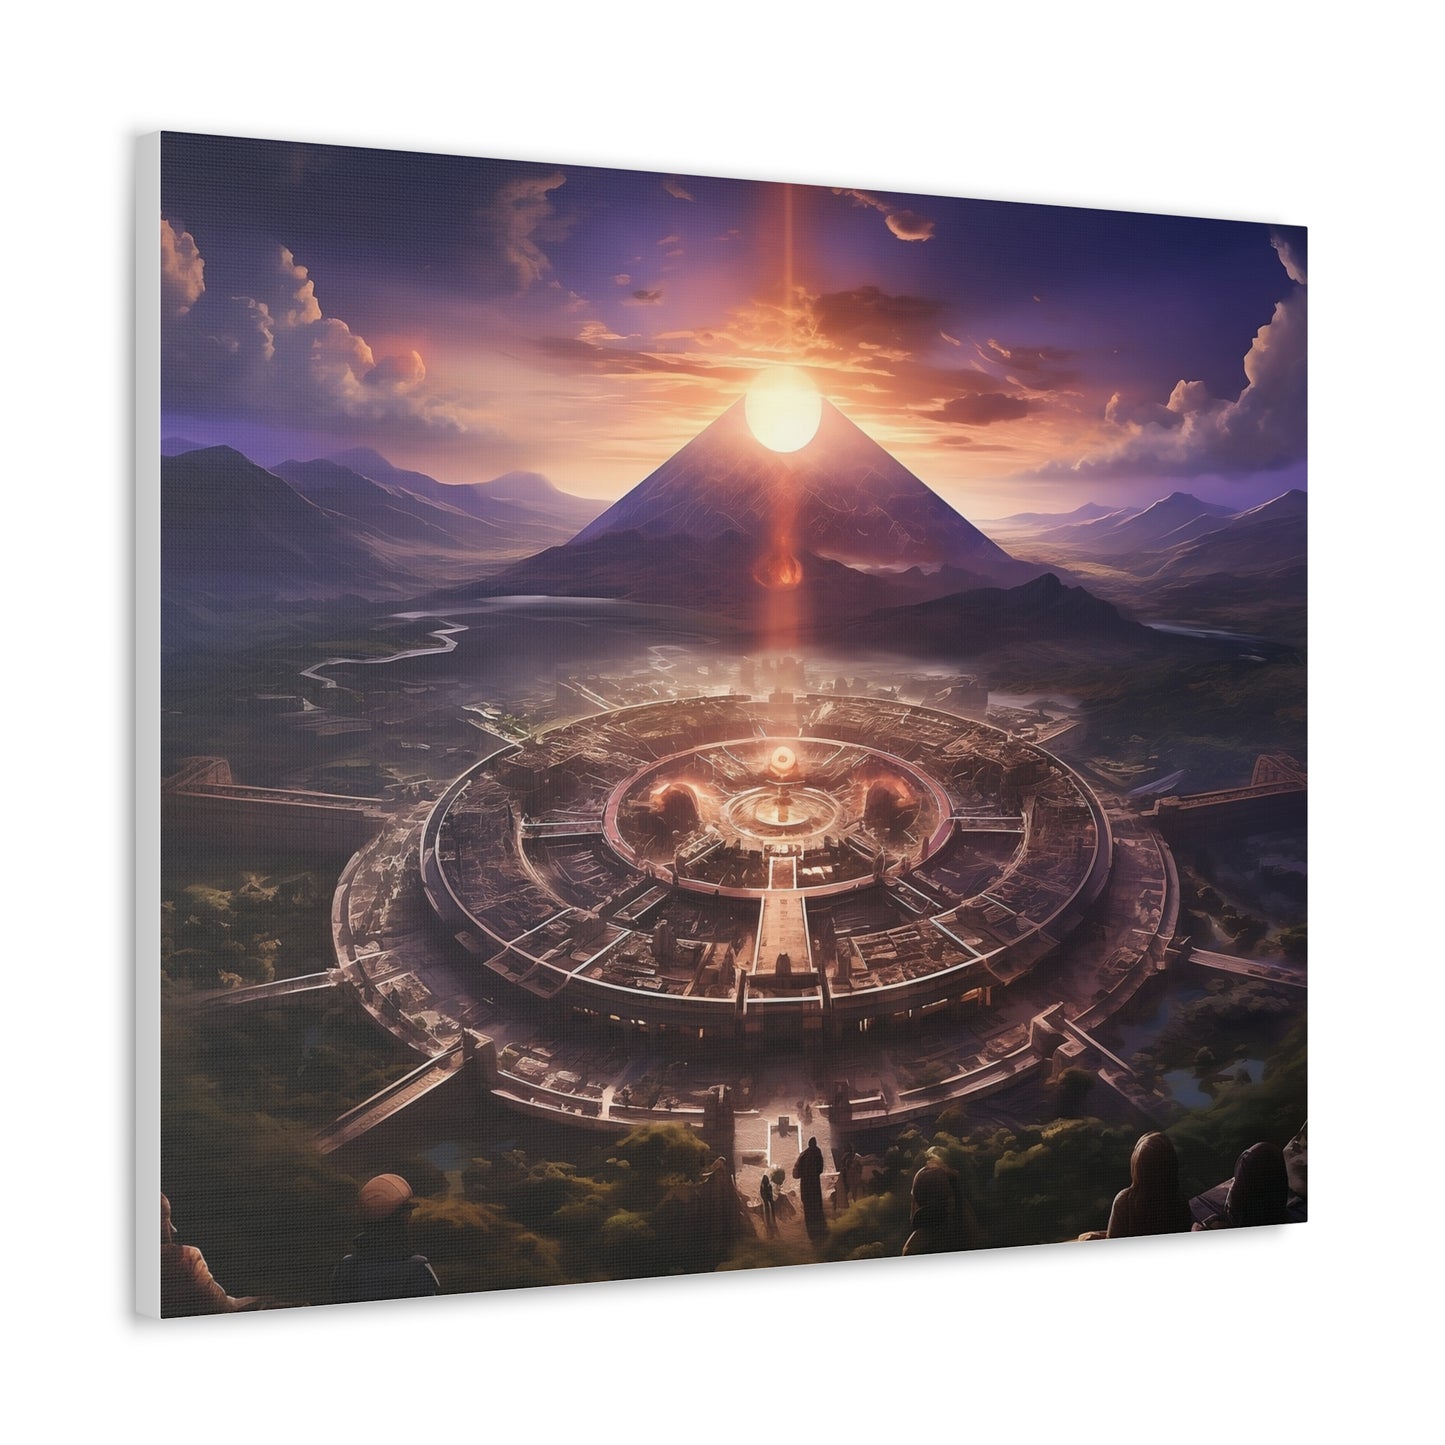 Ancient Mayan Temple With Mountain and Sunset Canvas Spiritual Decor